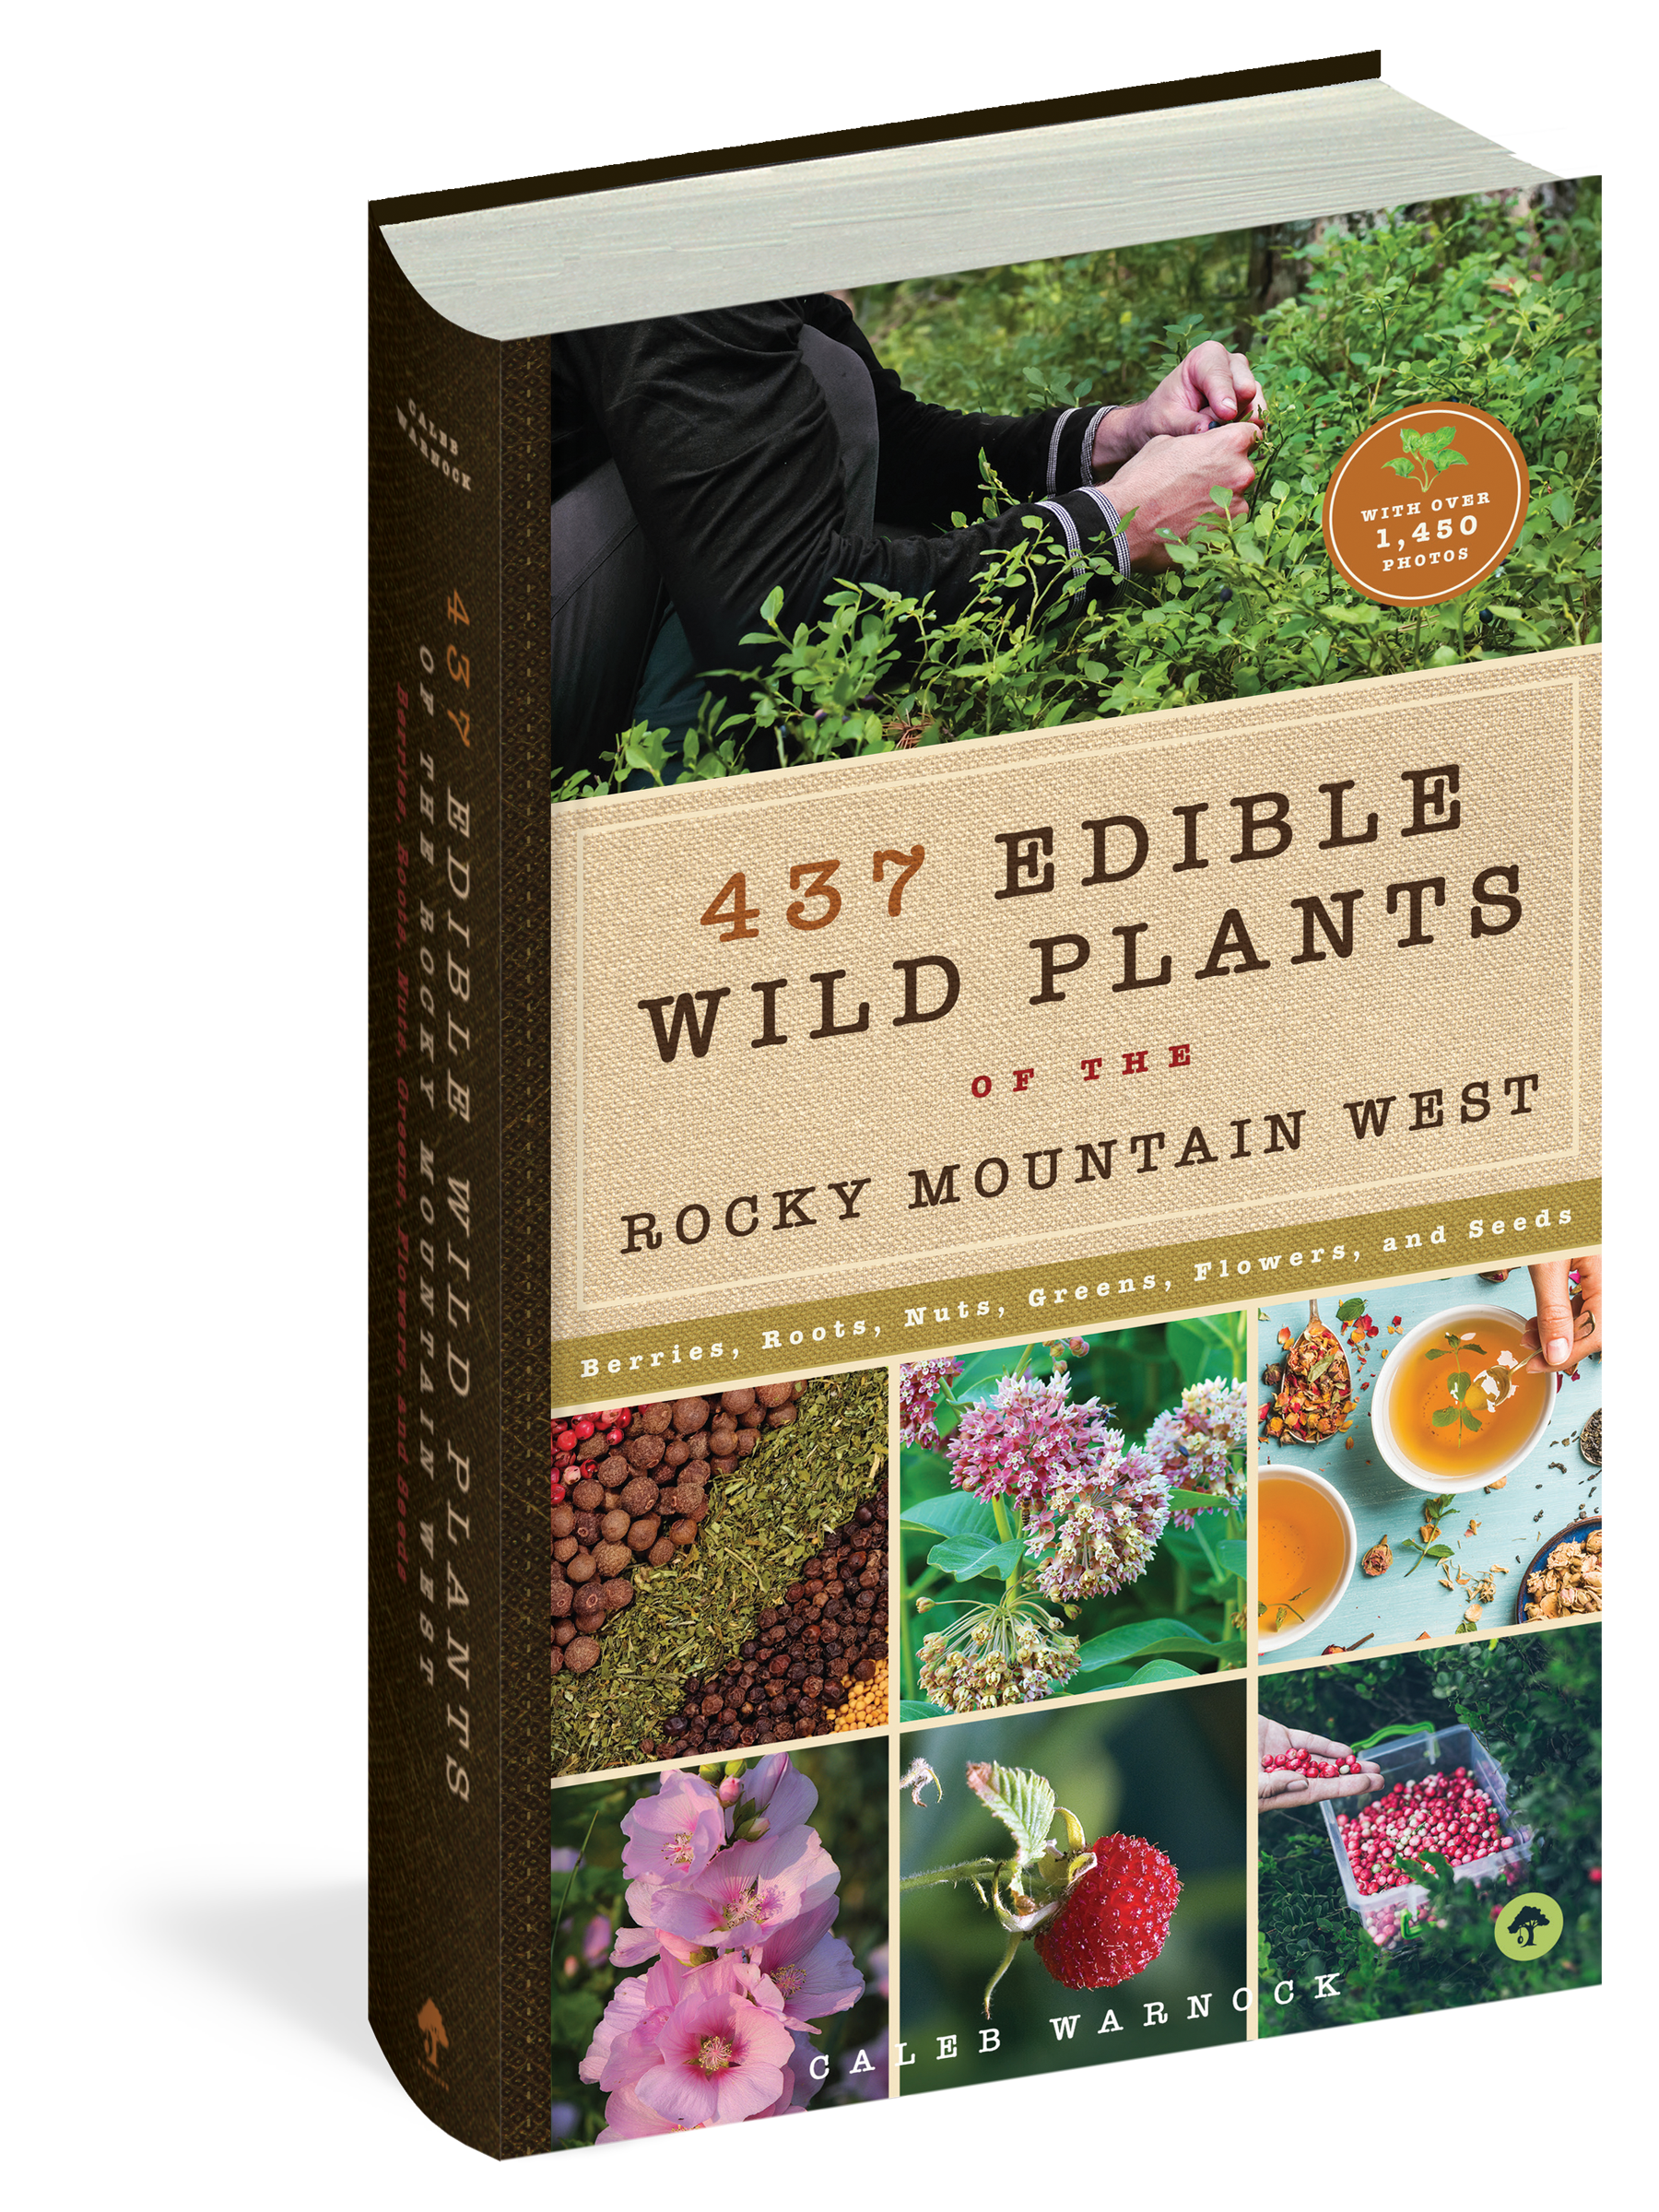 The cover of the reference book 437 Edible Wild Plants of the Rocky Mountain West.